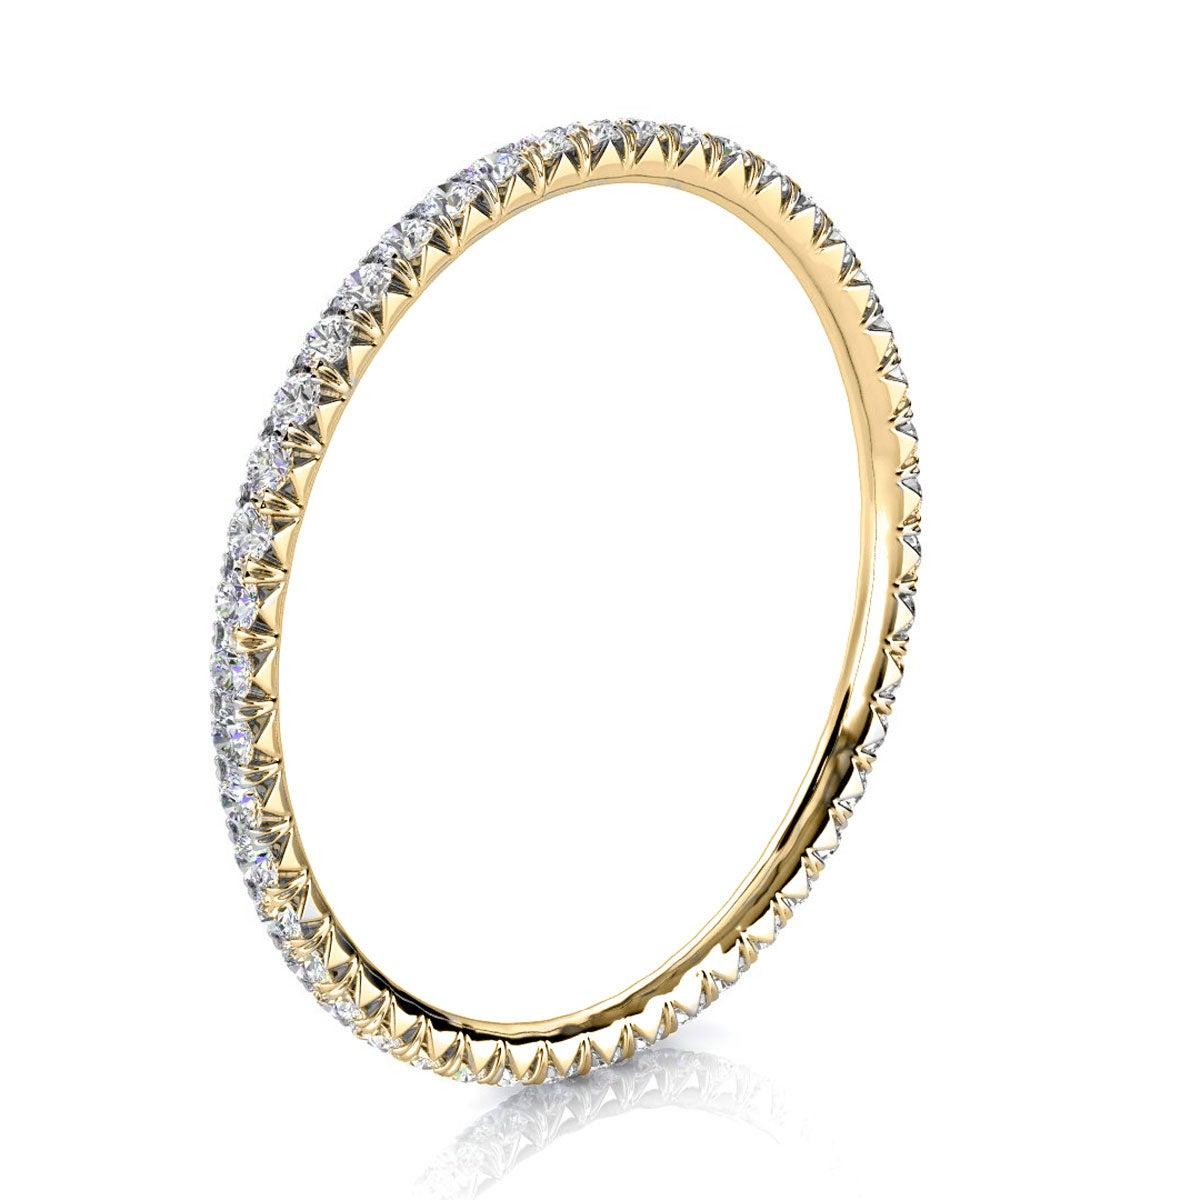 For Sale:  14K Yellow Gold Mia Petite French Pave Diamond Eternity Ring '1/4 Ct. Tw' 2